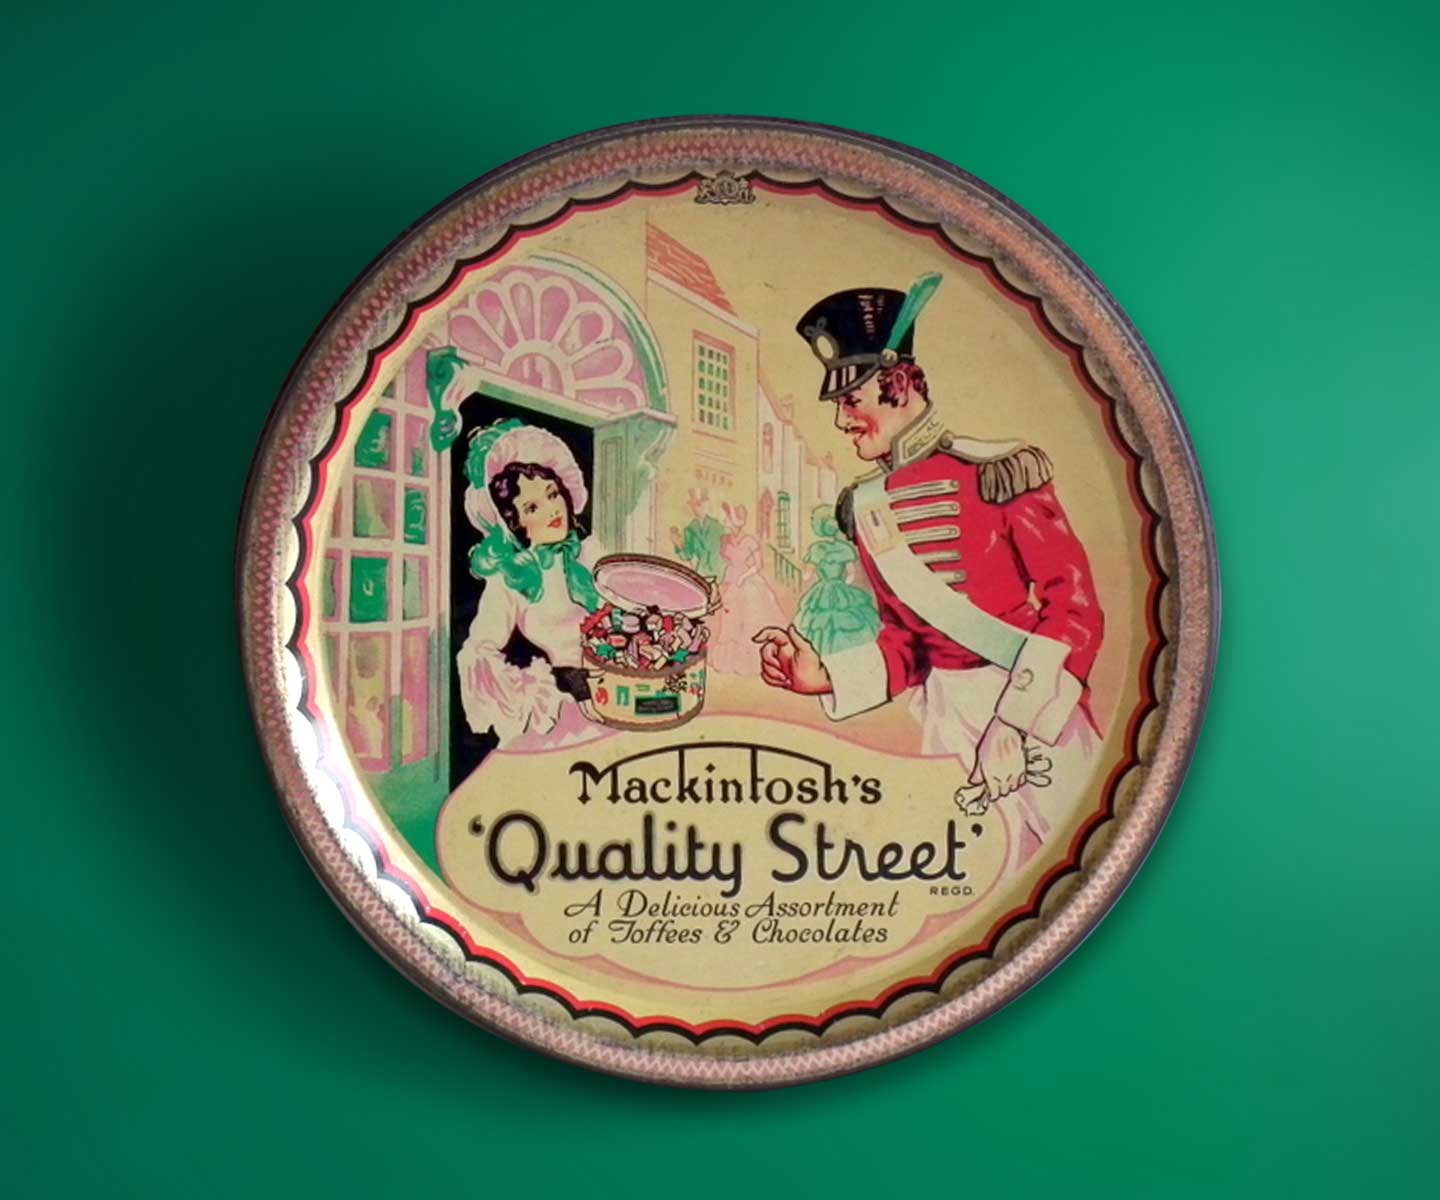 https://www.qualitystreet.co.uk/sites/default/files/2023-03/2021-10-15-QS_Tin-History-Images_1440x1200px_1960s.jpg